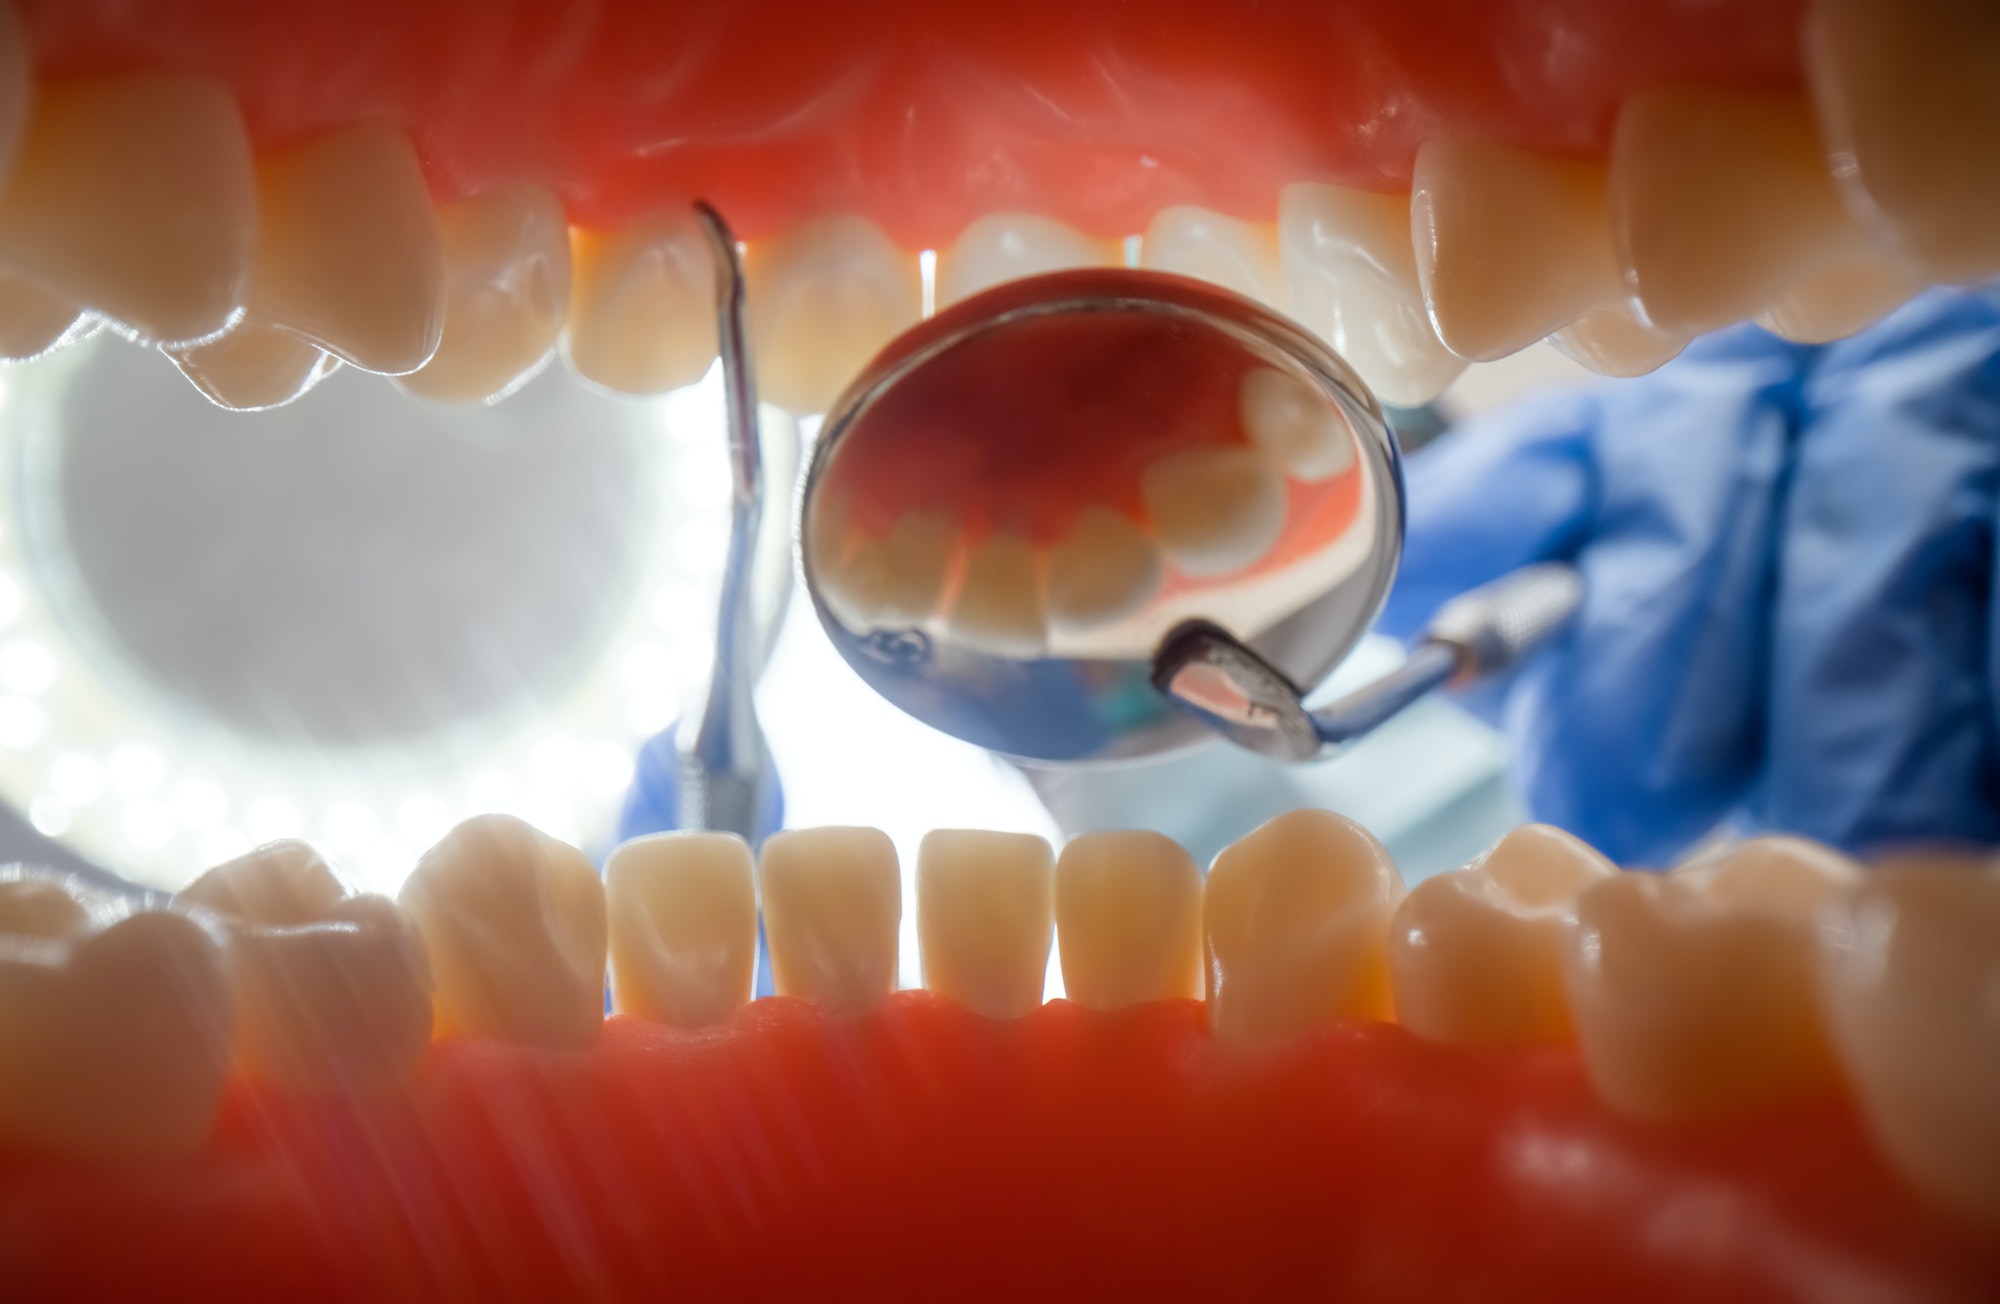 Patient at a dentist appointment in a dental clinic. View from inside the dental jaw.